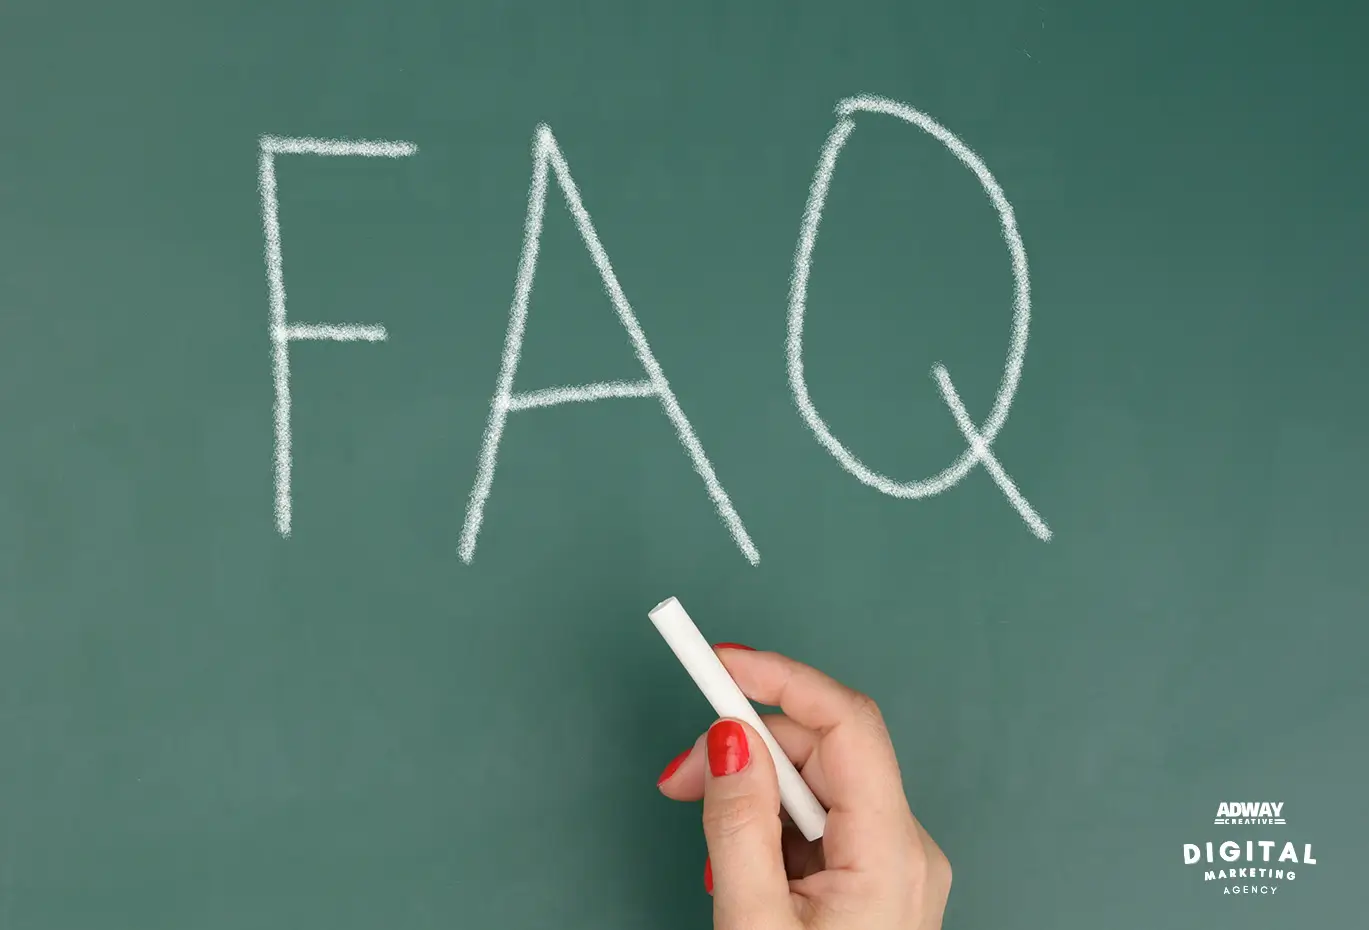 FAQ - frequently asked questions and answers